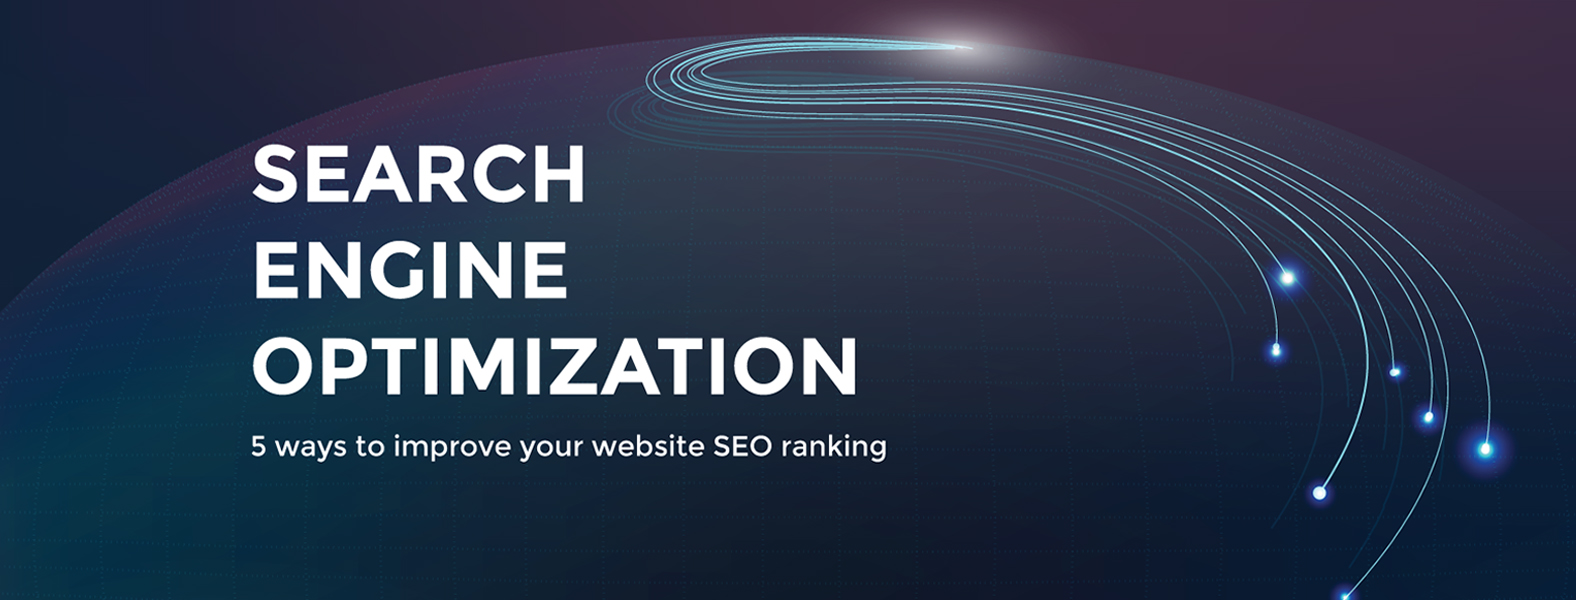 5 Ways to Improve Your Website SEO Ranking cover image